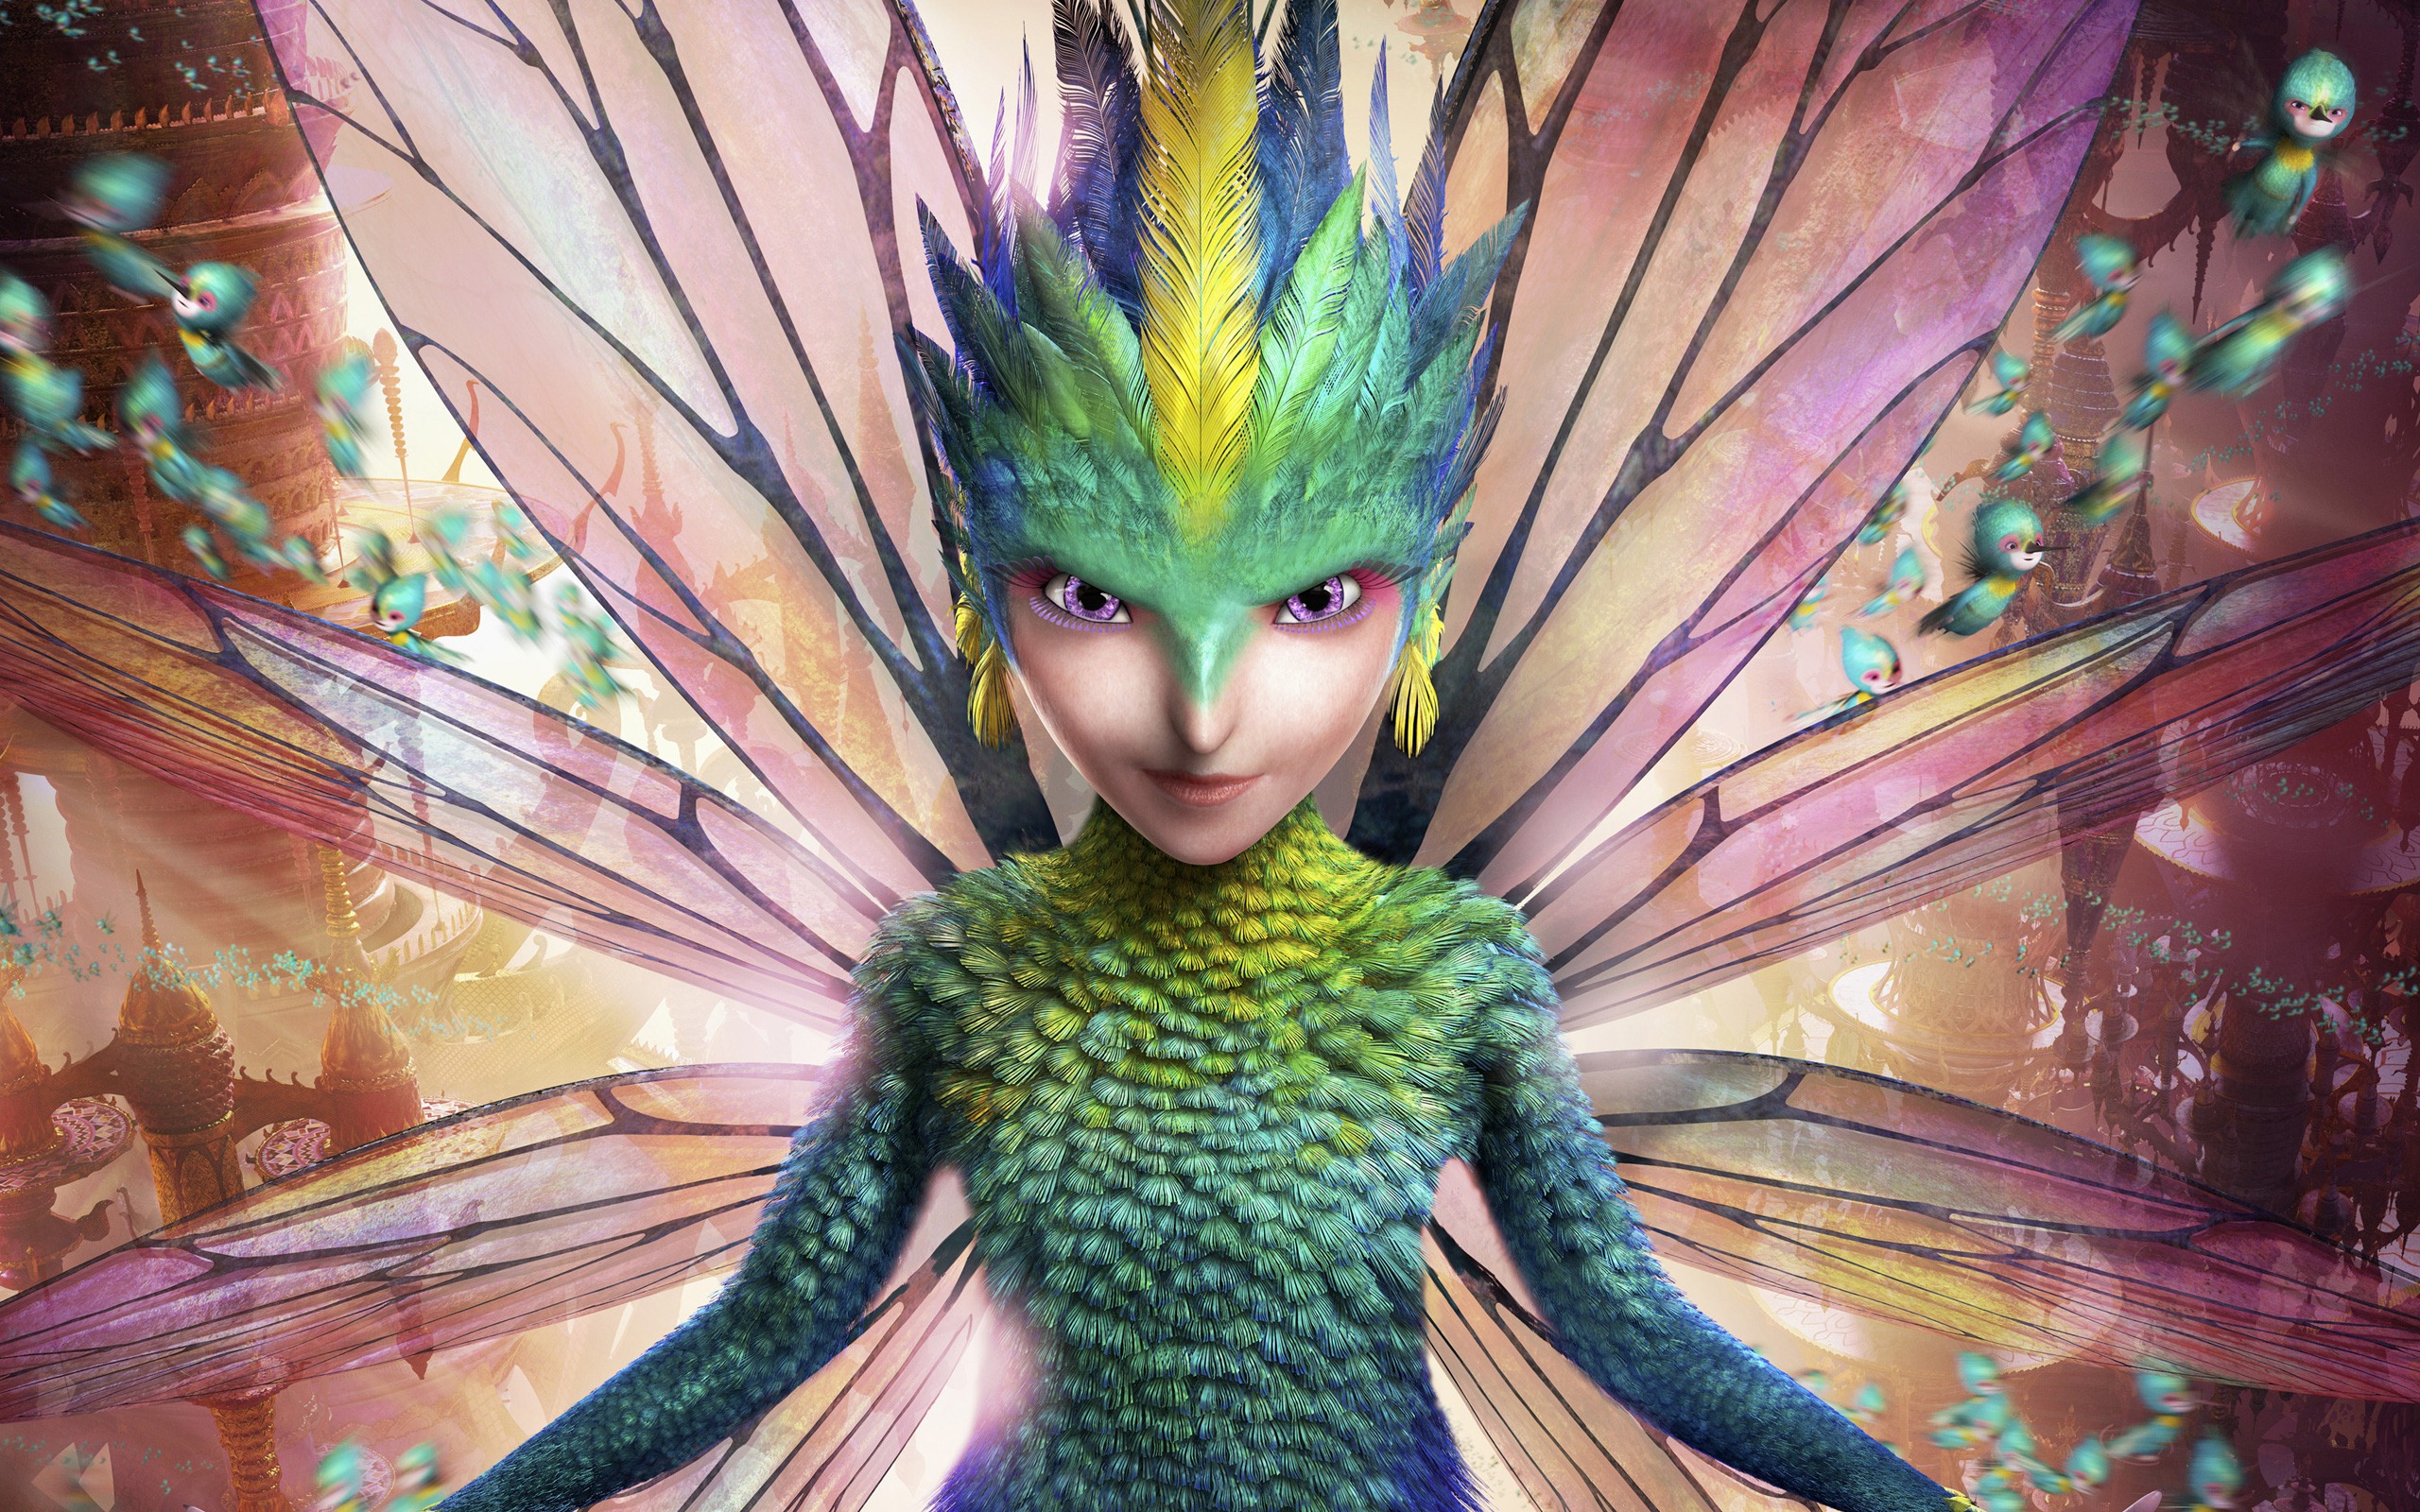 Rise of the Guardians HD wallpapers #14 - 2560x1600